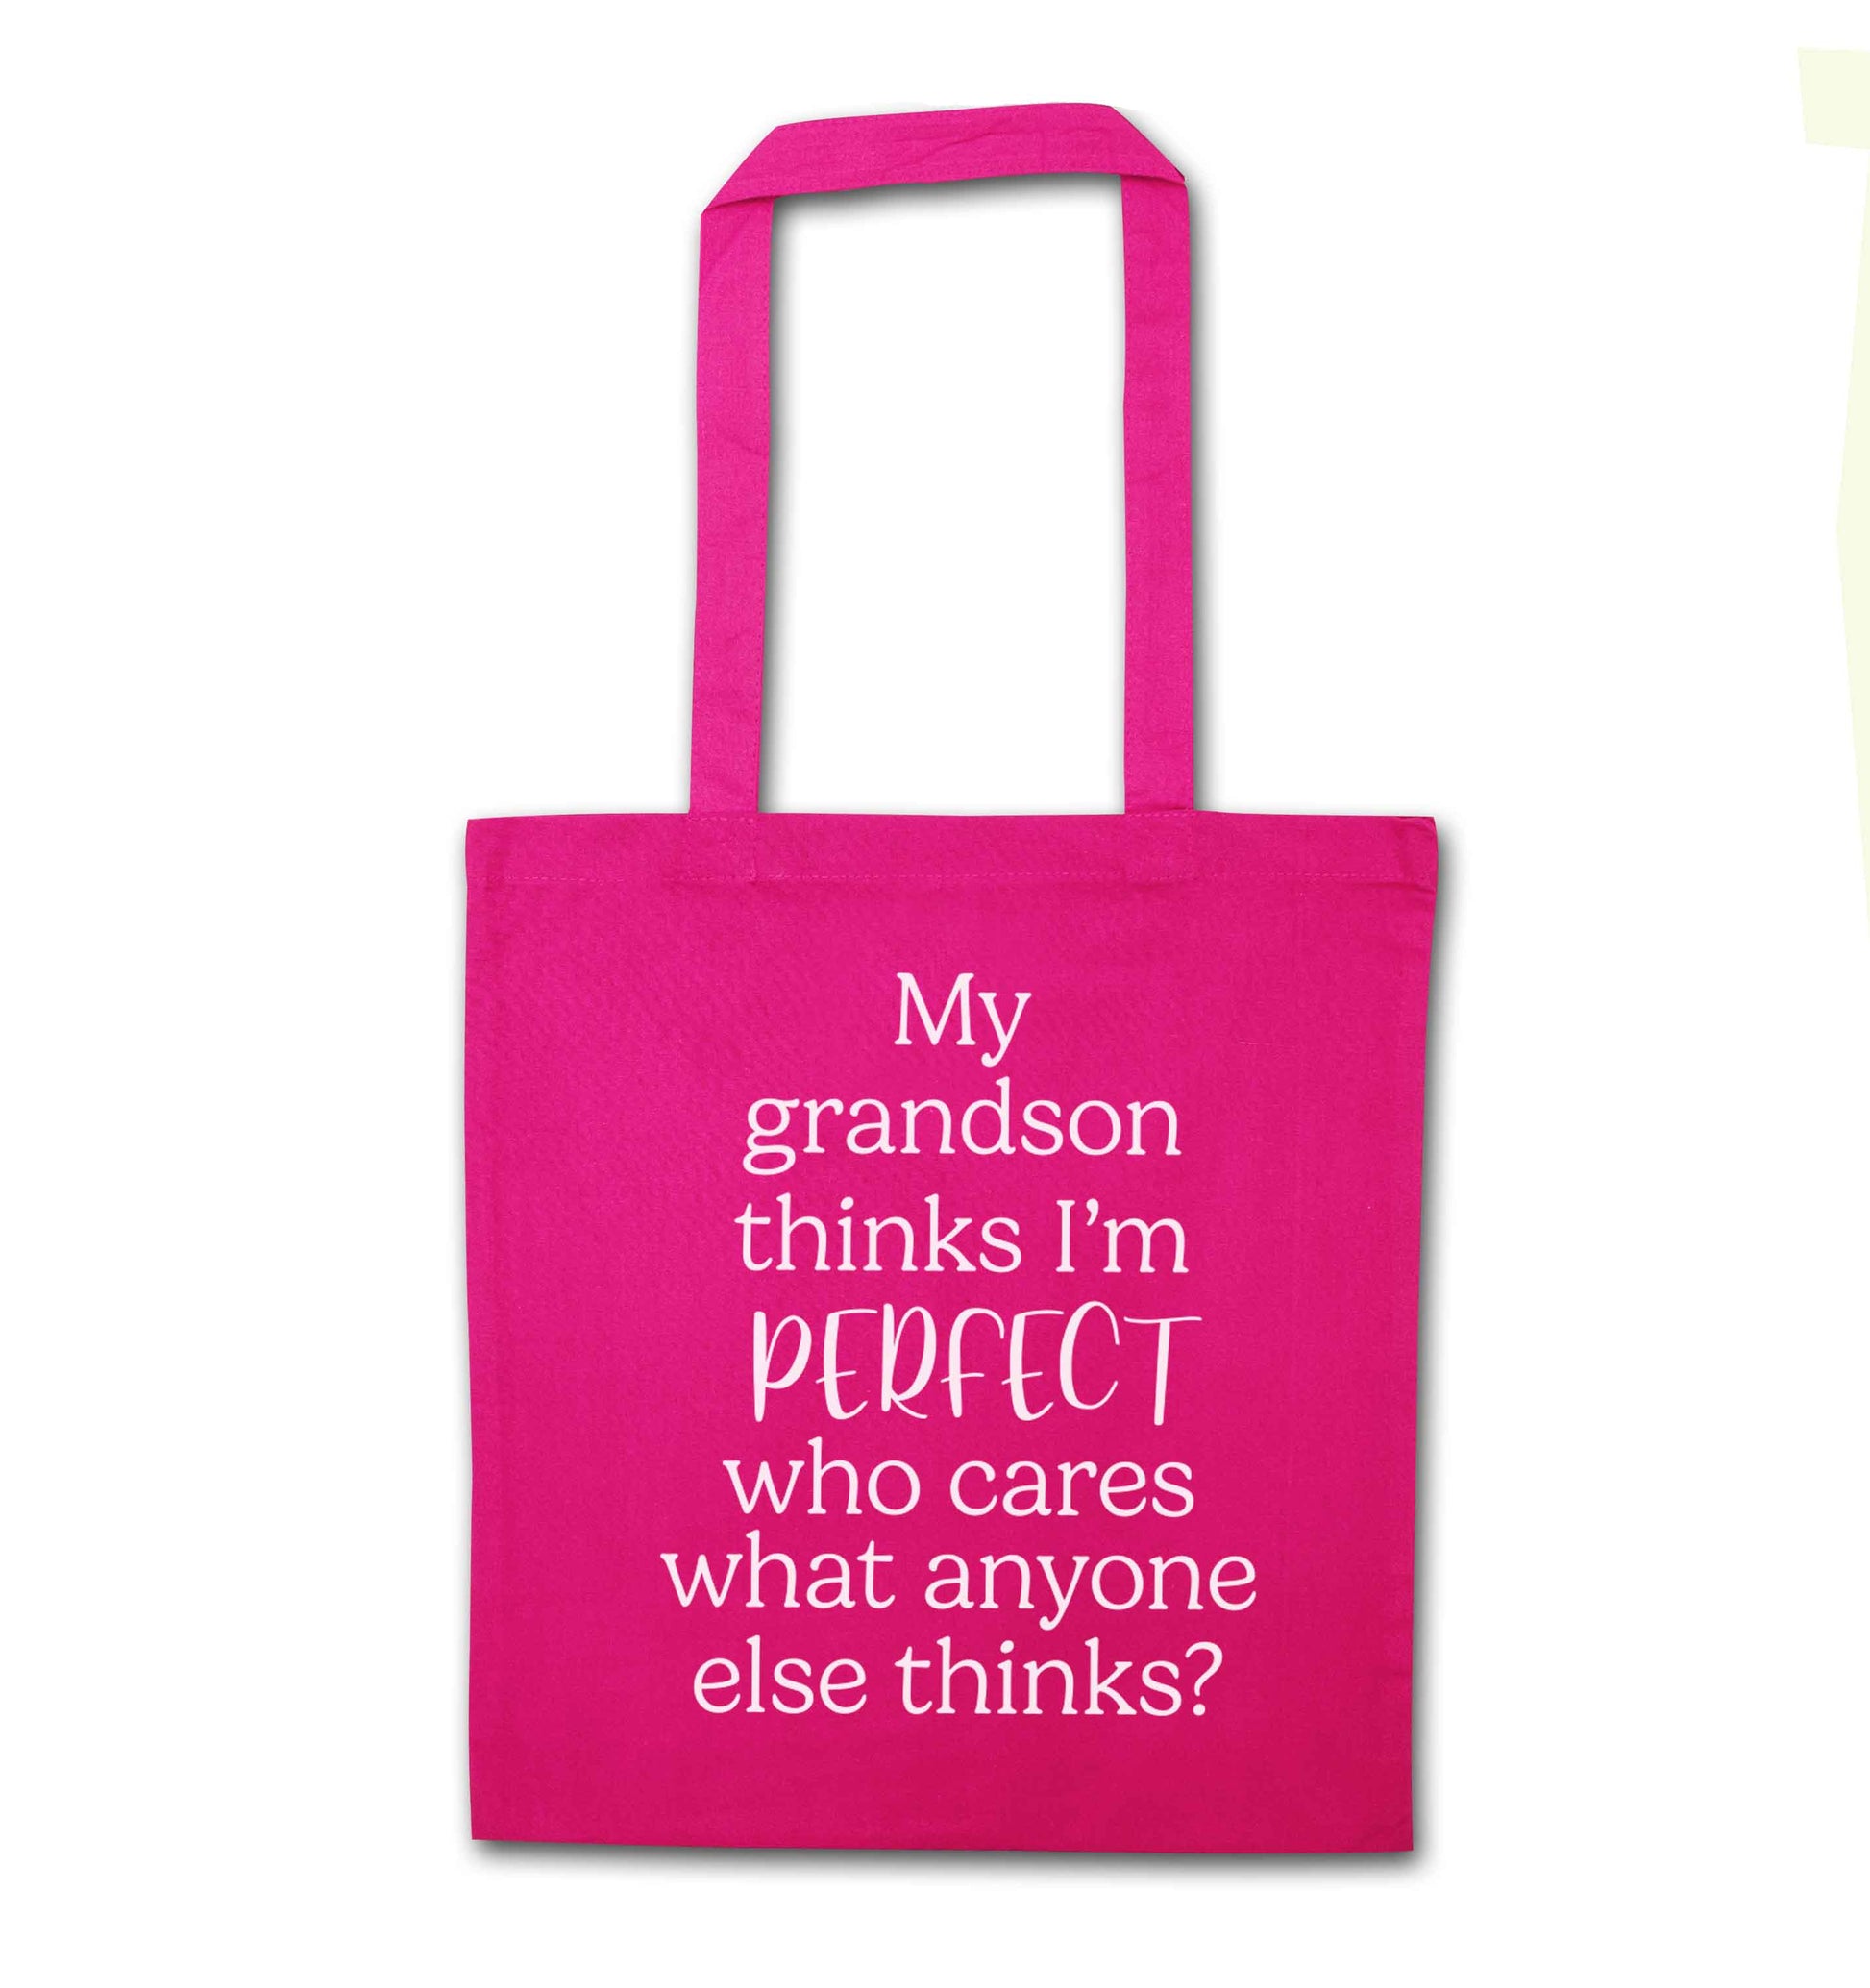 My grandson thinks I'm perfect pink tote bag